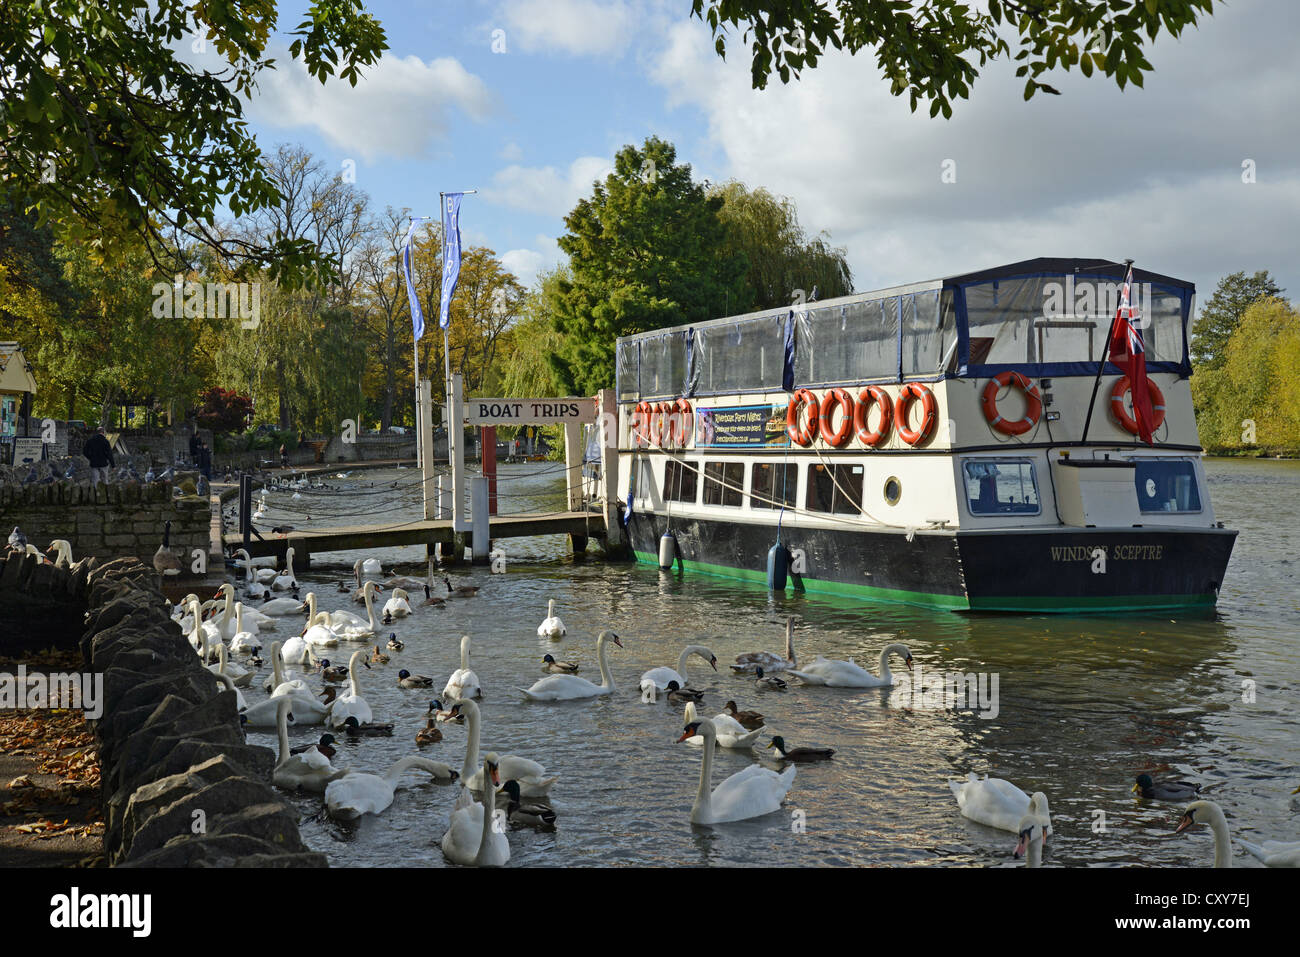 Riverboat moored by River Avon, Windsor, Berkshire, England, United Kingdom Stock Photo